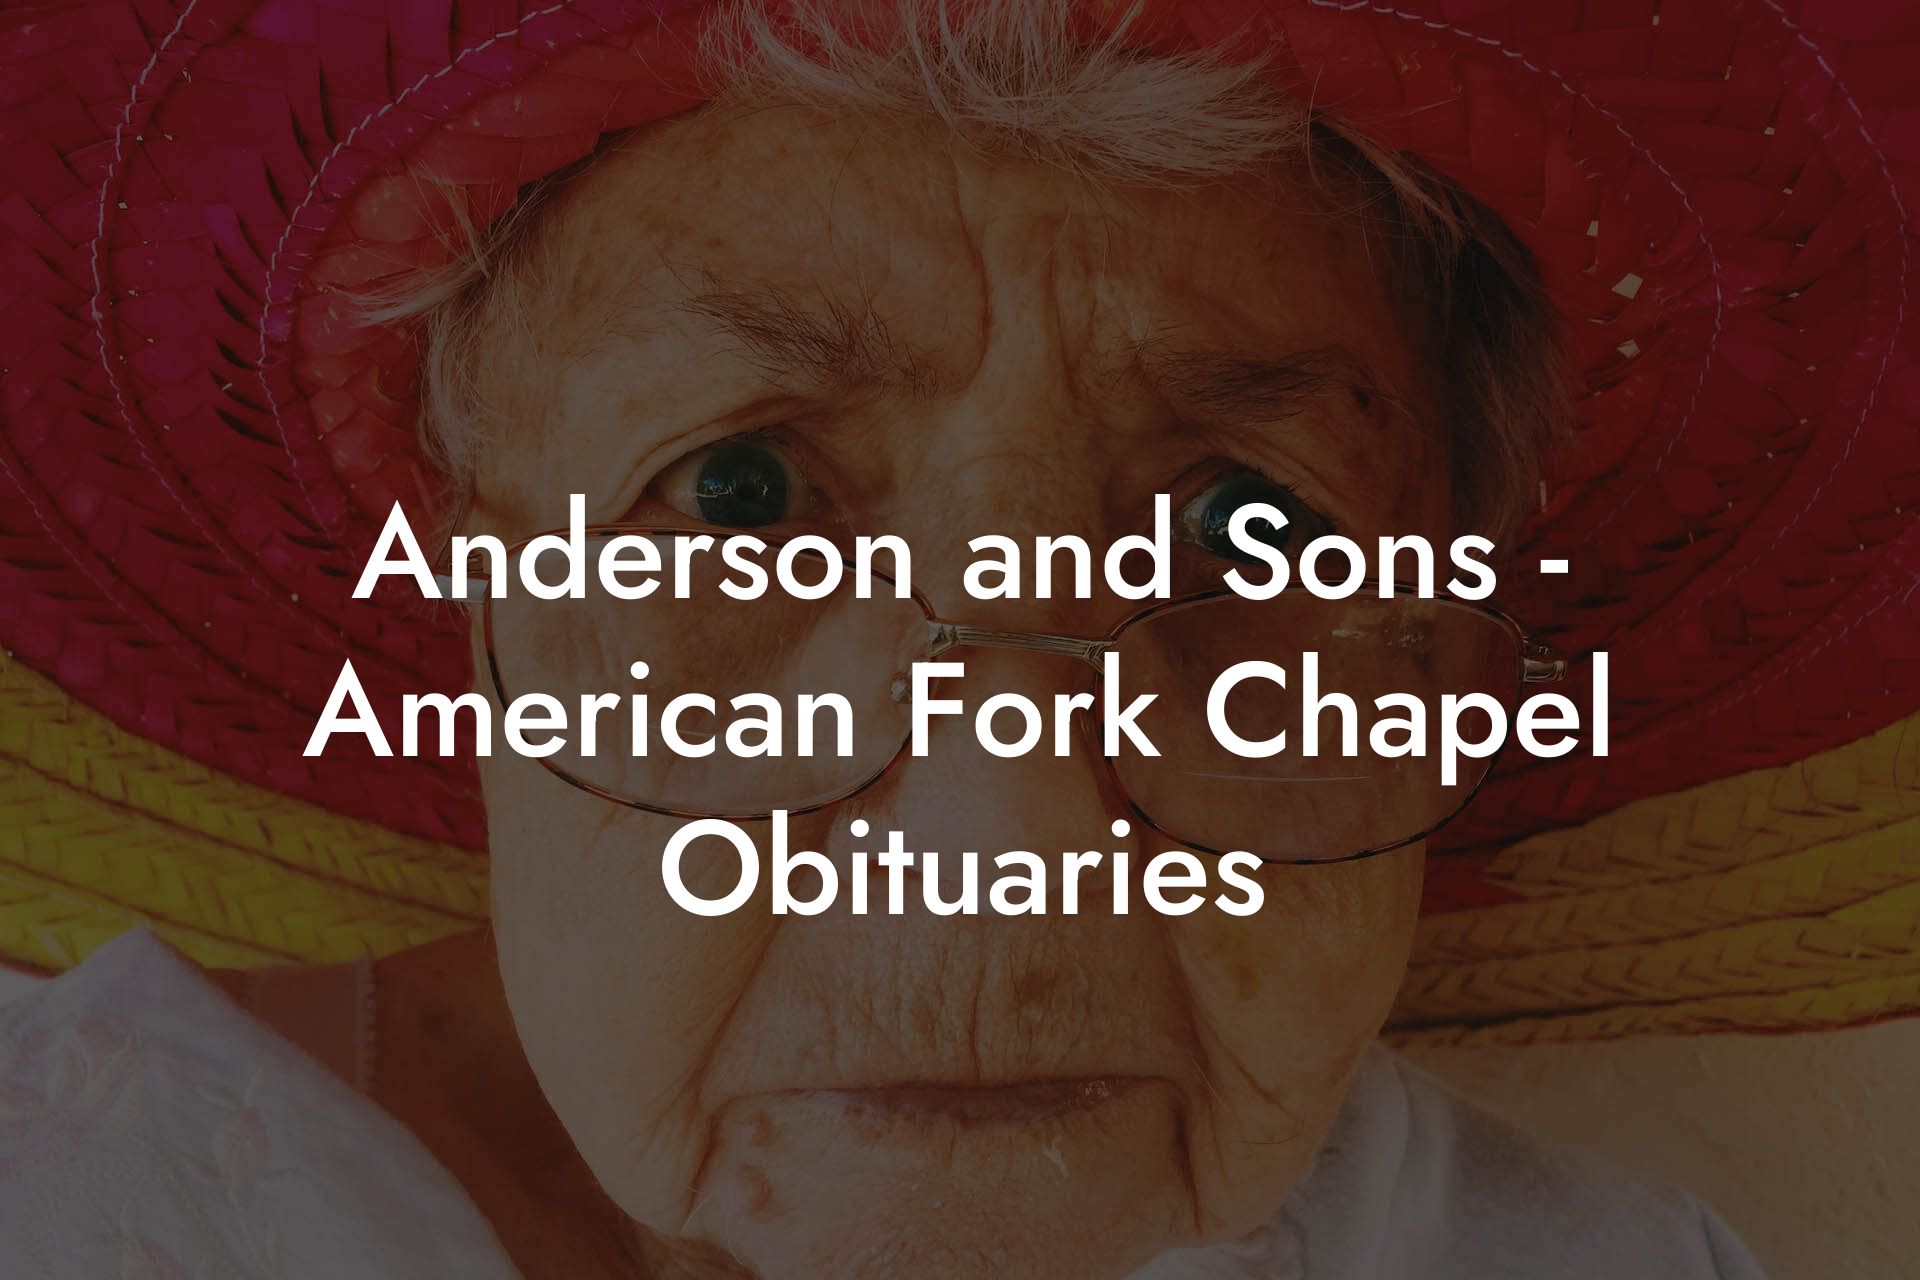 Anderson and Sons - American Fork Chapel Obituaries